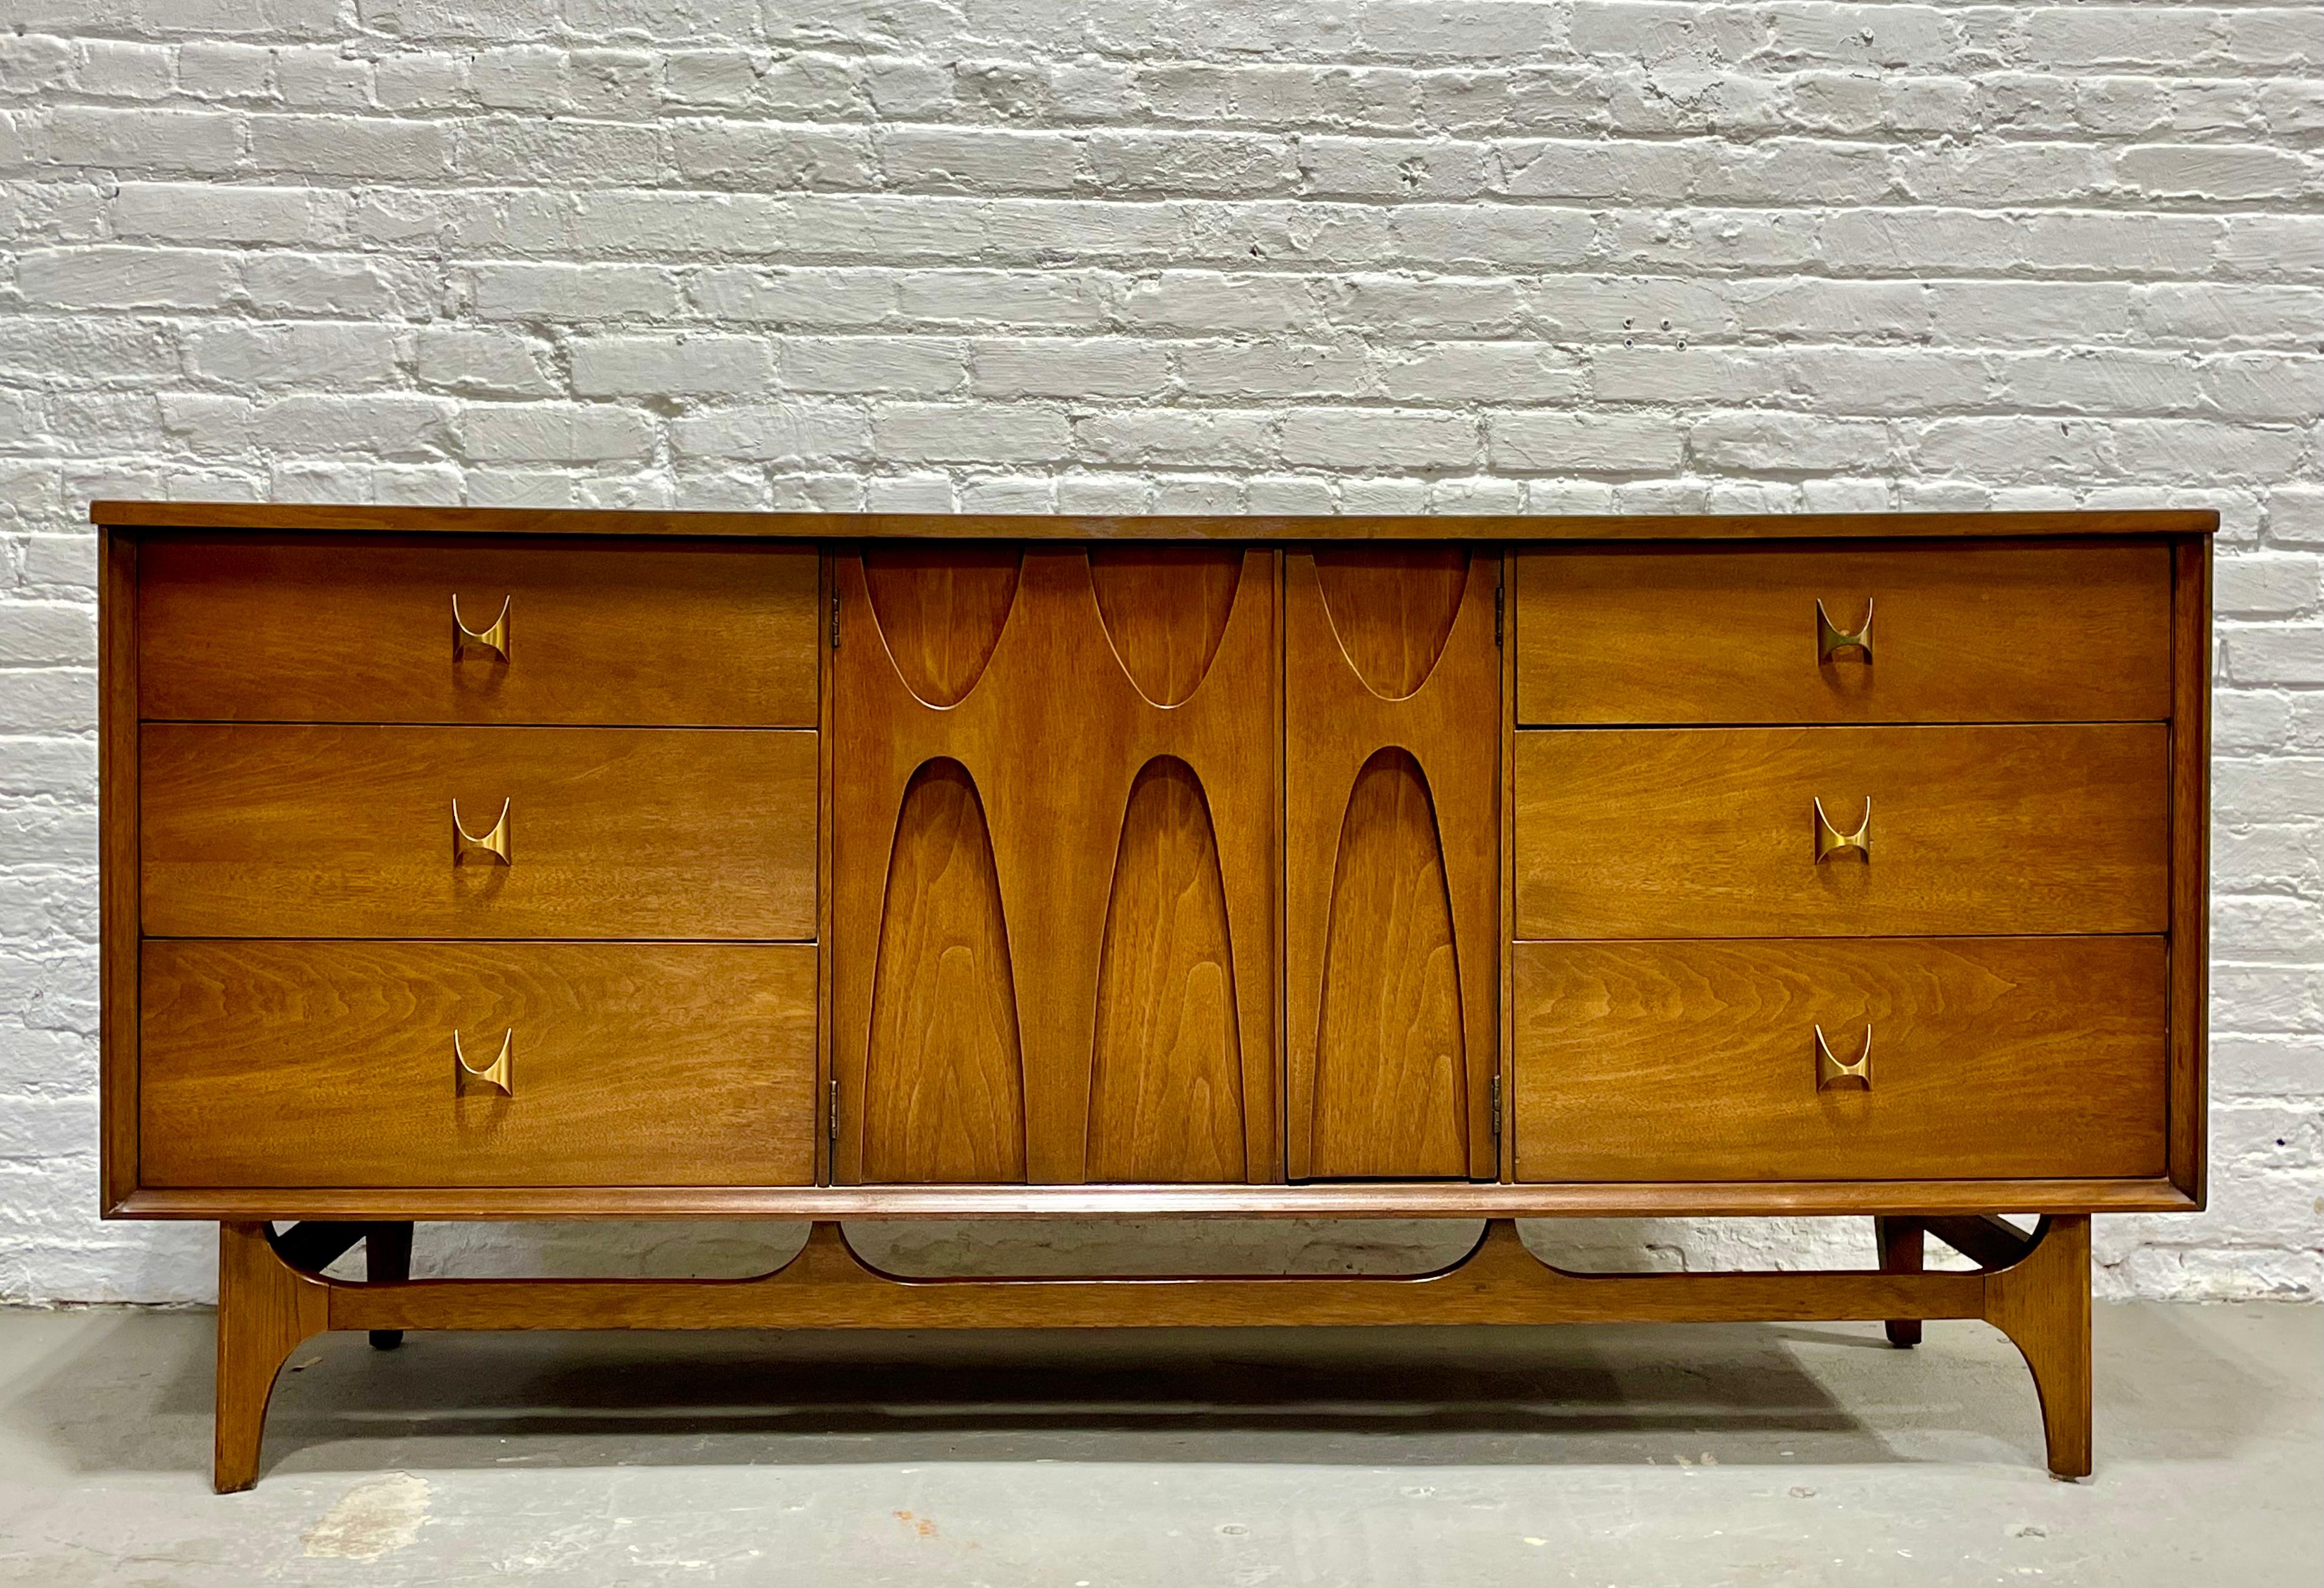 Mid-Century Modern Broyhill Brasilia Dresser, circa 1960s. This is a magnificent dresser from the much beloved and voraciously collected Brasilia collection. From the distinctive elongated, inverted sculpted arches to the brass hand pulls, this